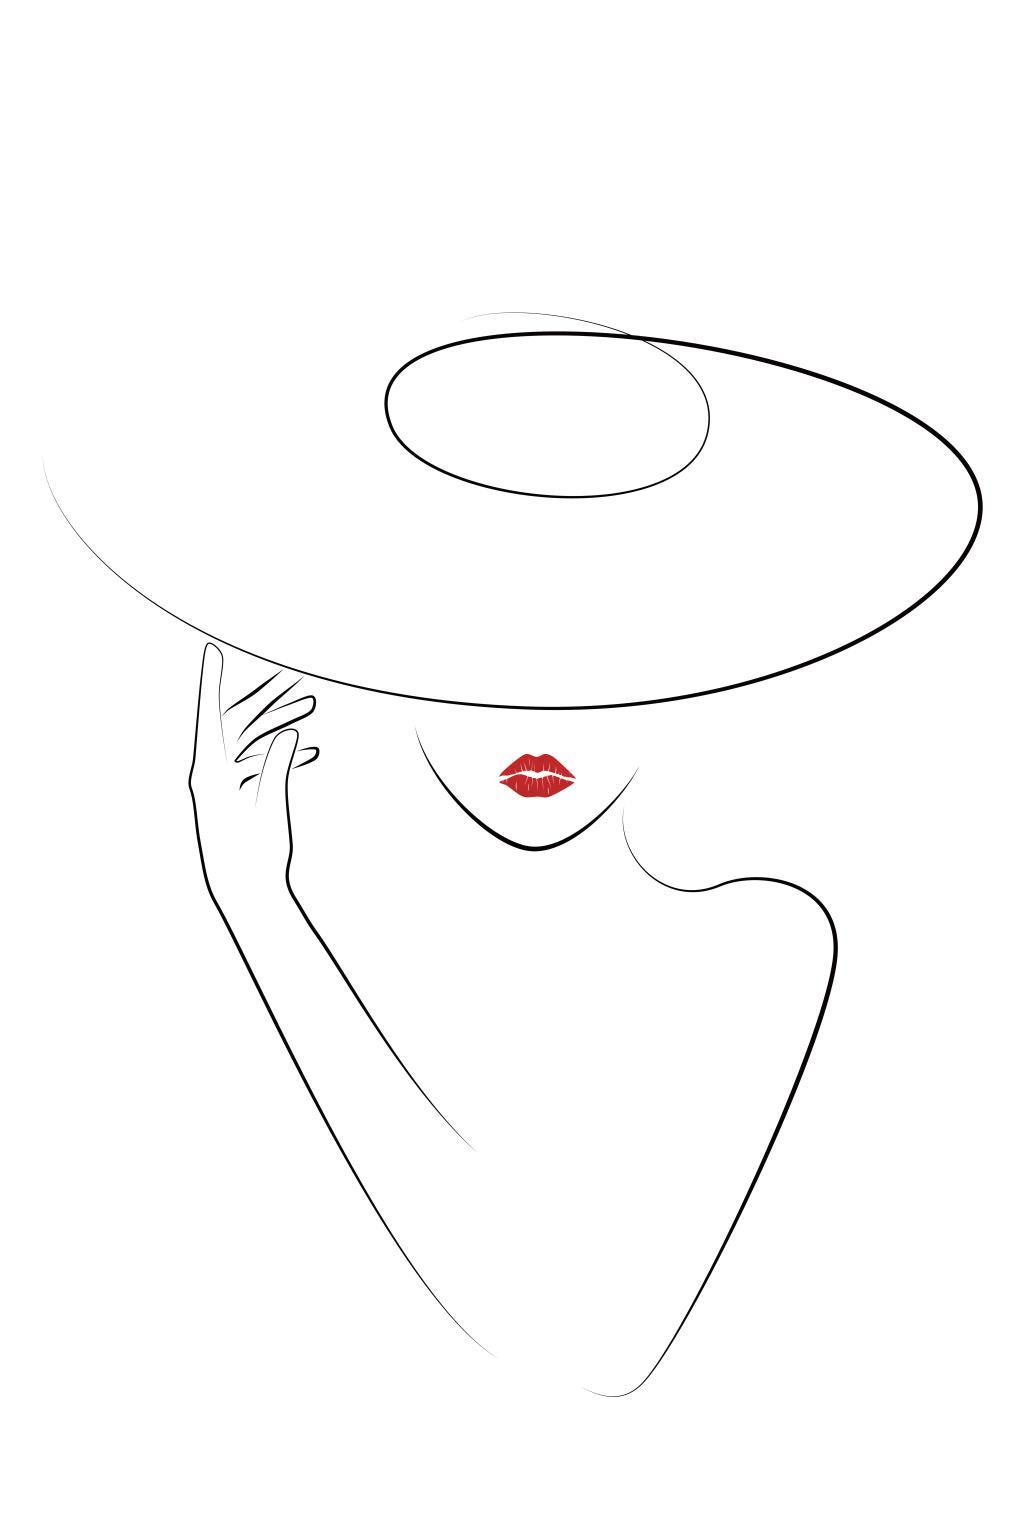 Framed Small - Hat Couture II By Jj Design - White